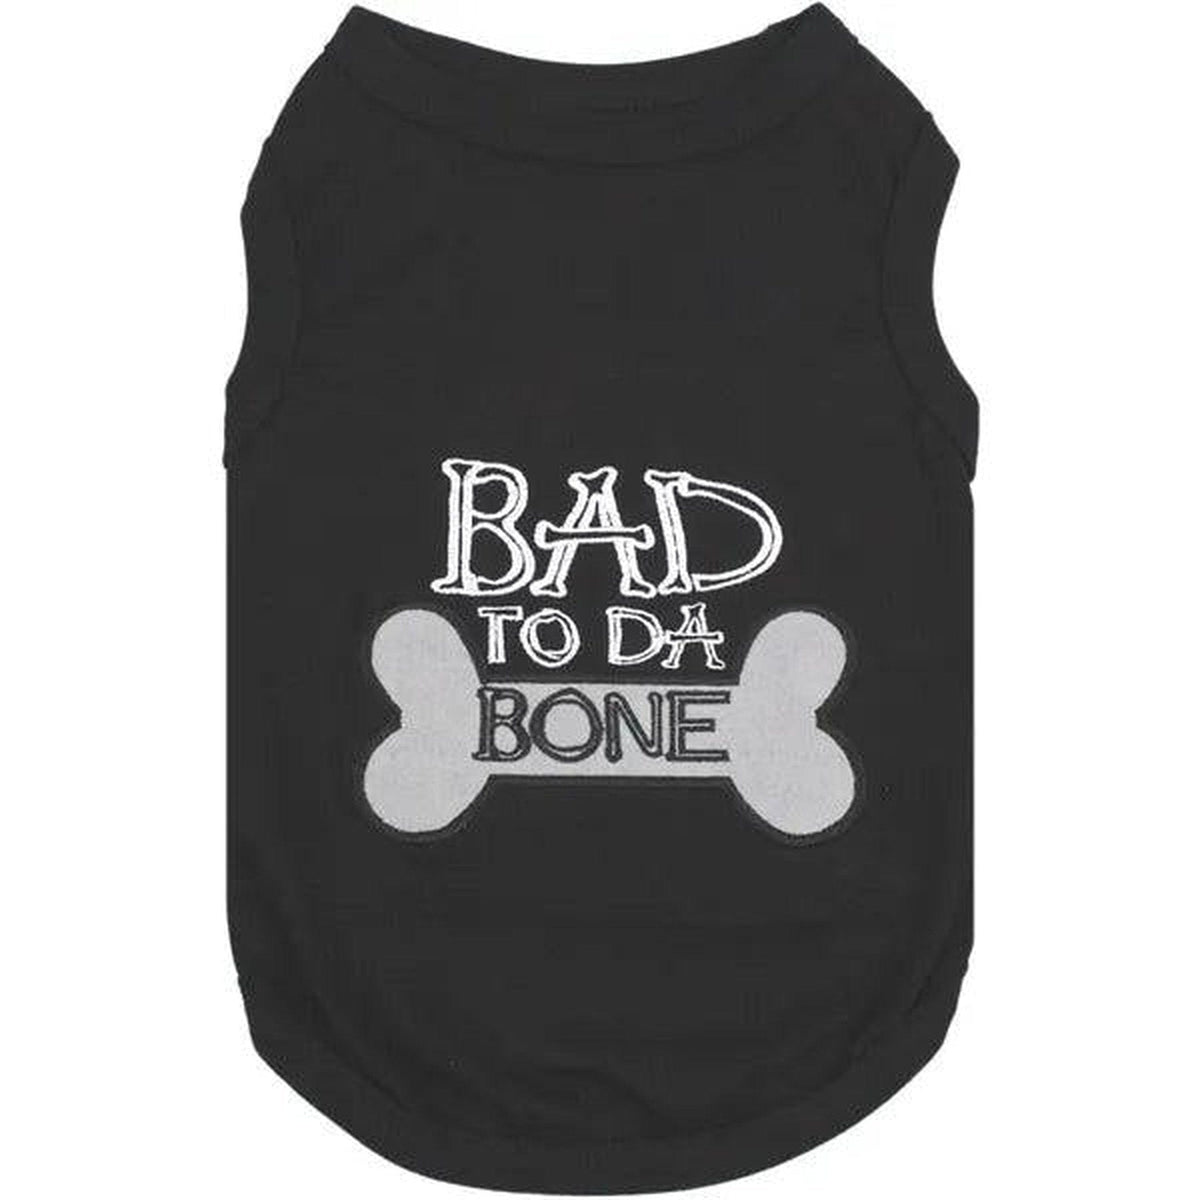 A black shirt with "Bad to Da Bone" embroidered in white text on it.

Revised Sentence: A black shirt with "Bad to Da Bone" embroidered in white text on it. (Product Name: 🐶 Embroidered Bad to Da Bone Dog Tee 👕, Brand Name: Pets Paradise)